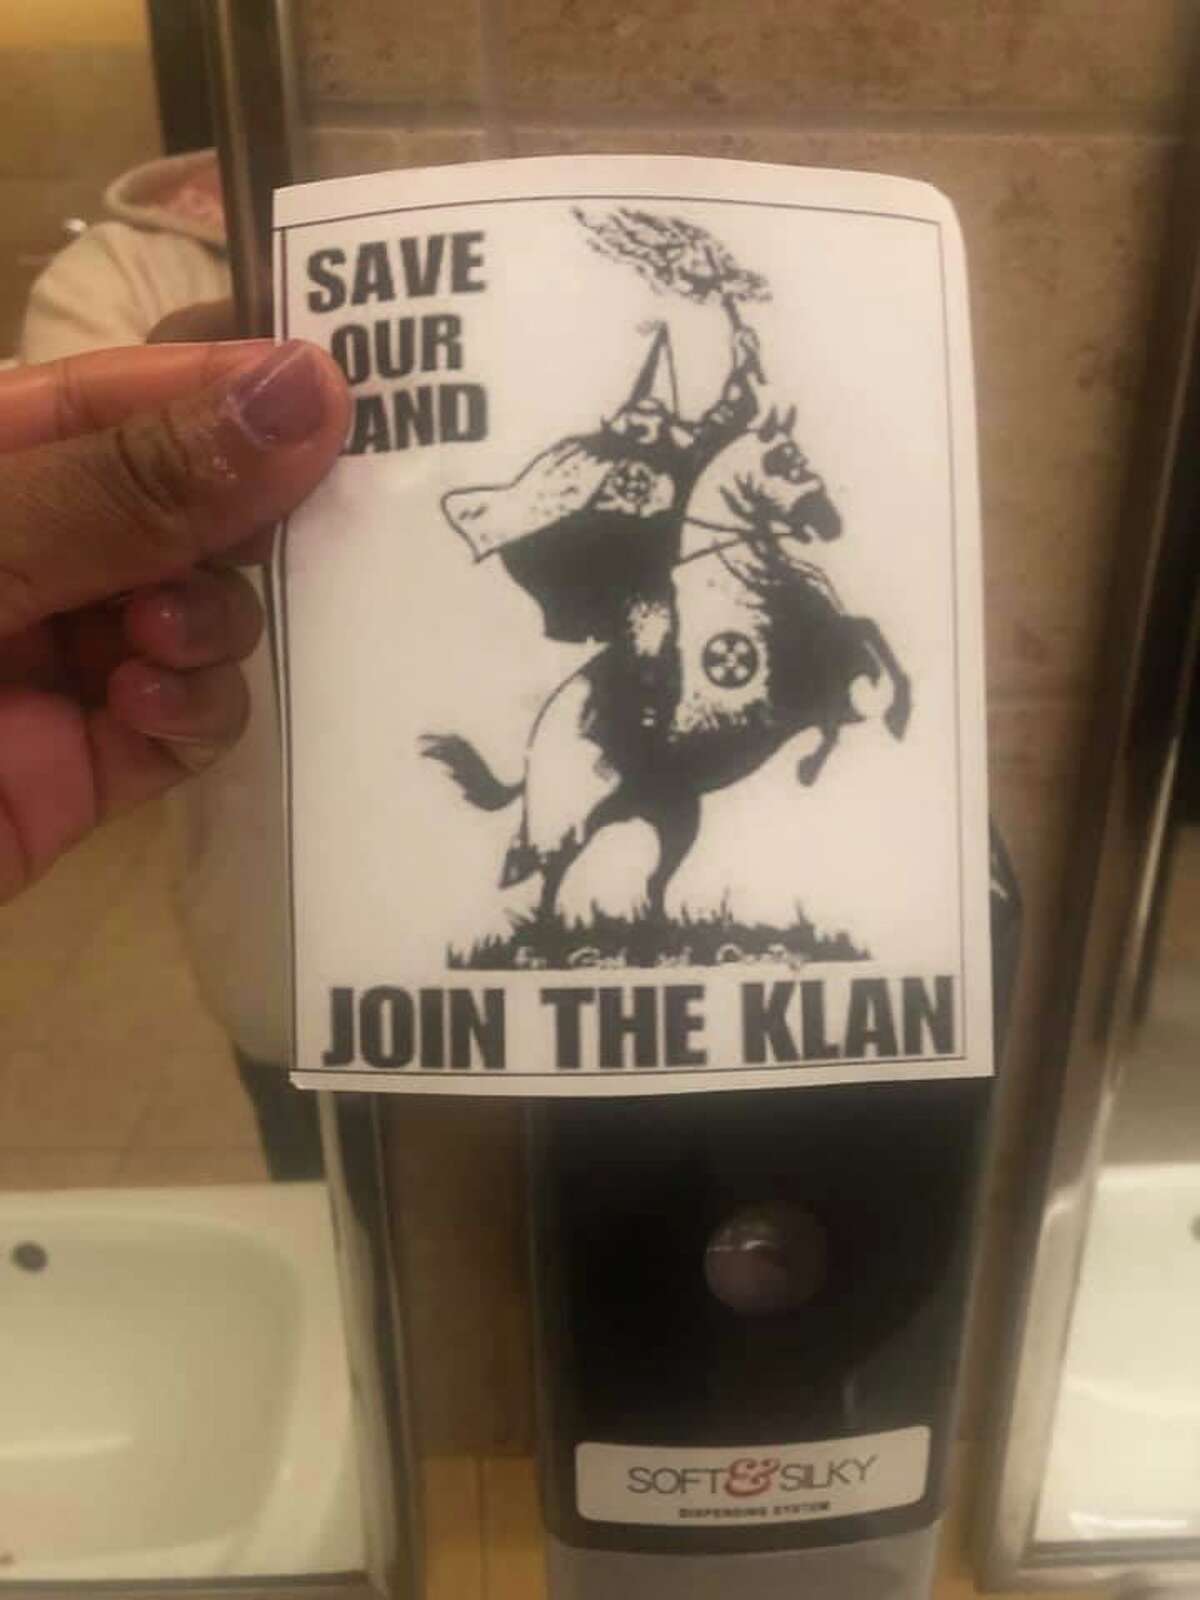 Flyers promoting the Ku Klux Klan were discovered on the East Central High School campus.